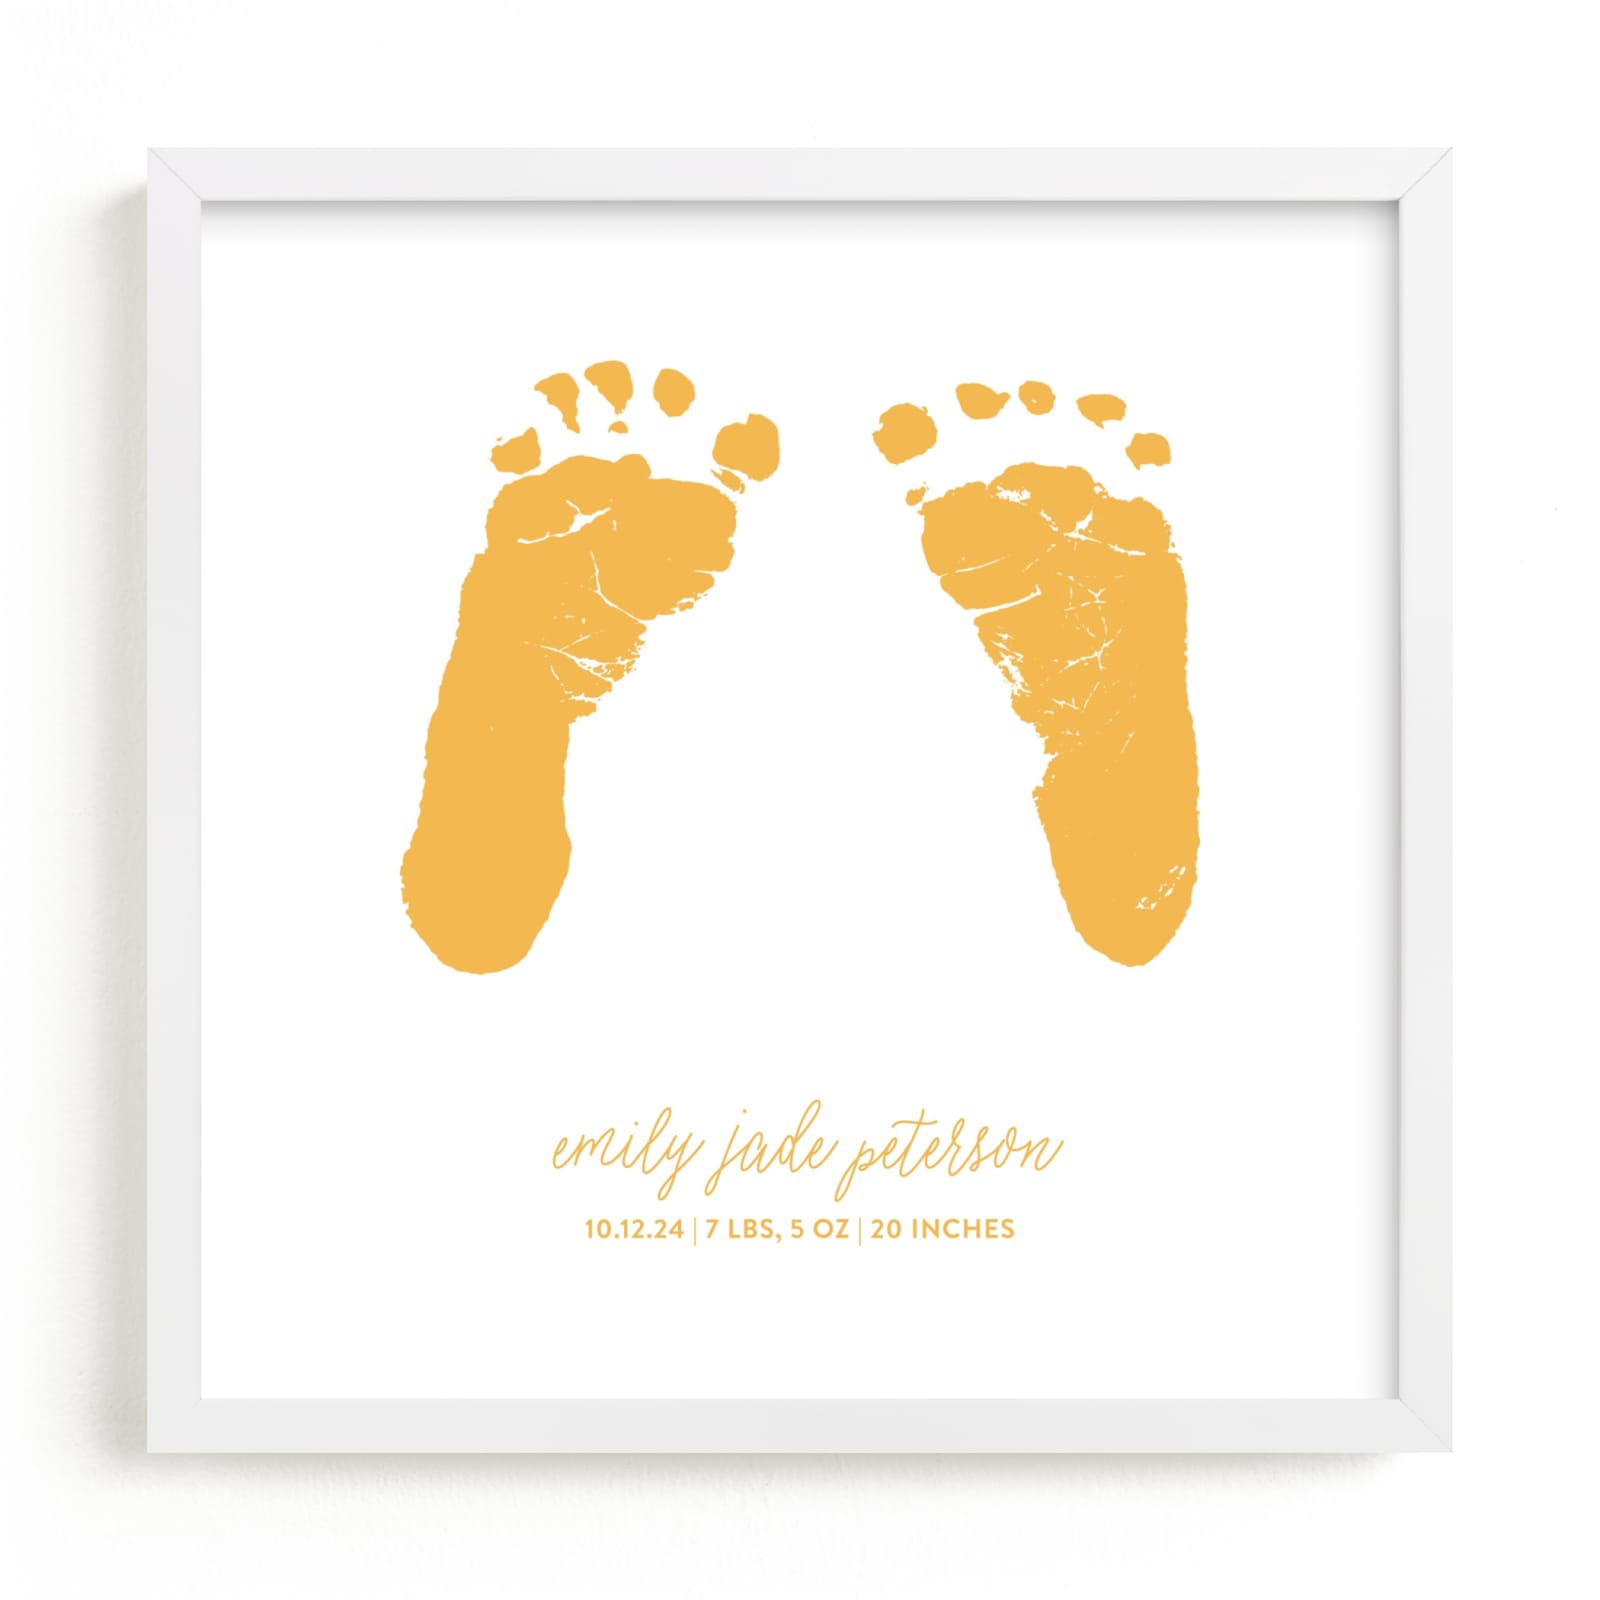 This is a yellow photos to art by Minted called Custom Footprints Letterpress Art.